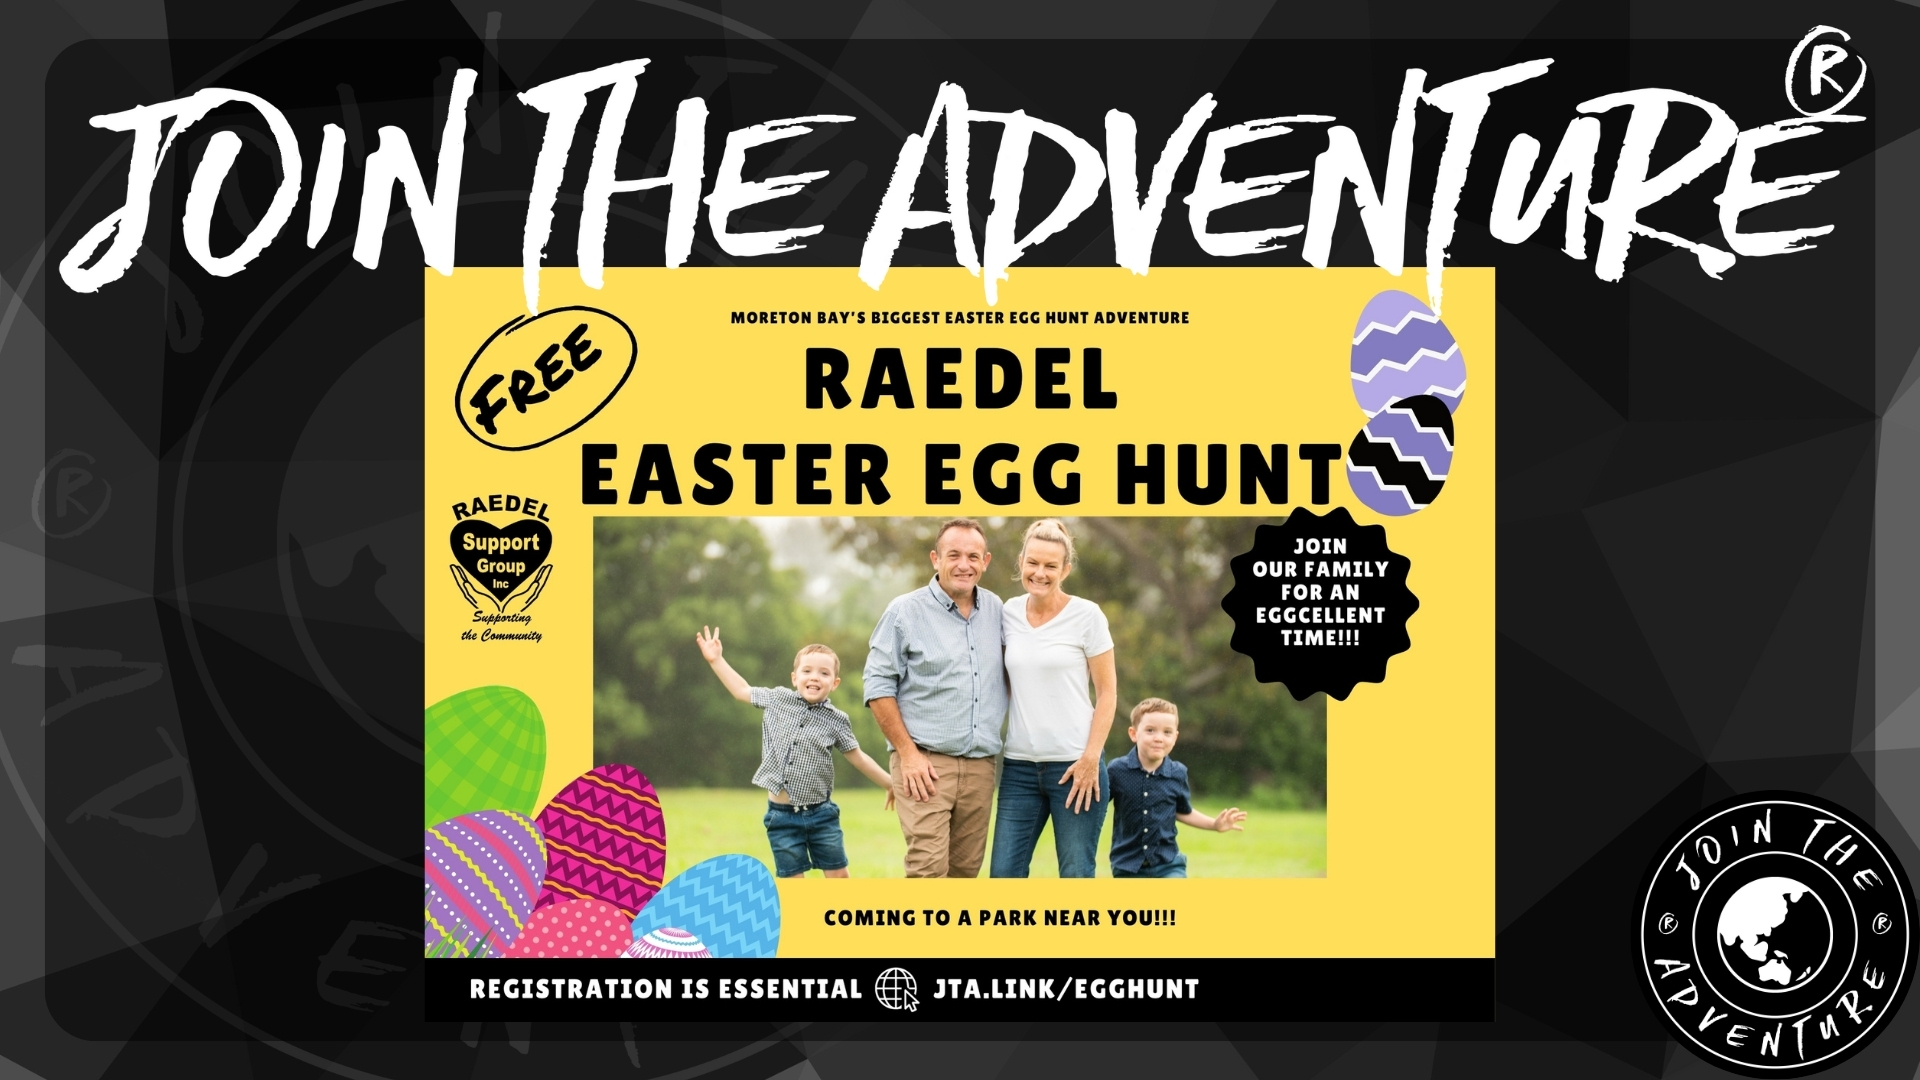 The Raedel Family Continues Tradition with 14th Annual Easter Egg Hunt Extravaganza in Moreton Bay